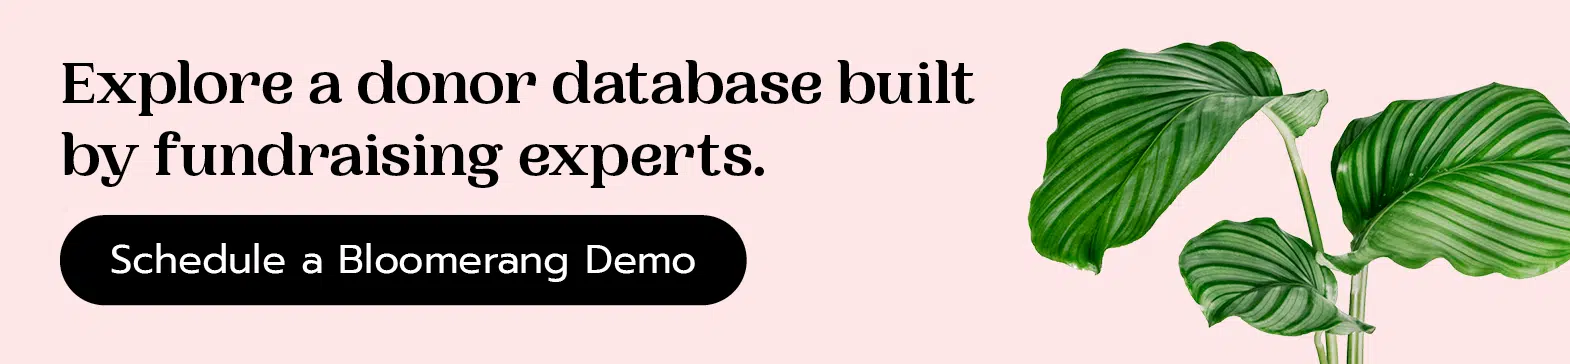 Explore a donor database built by fundraising experts. Schedule a Bloomerang demo here.